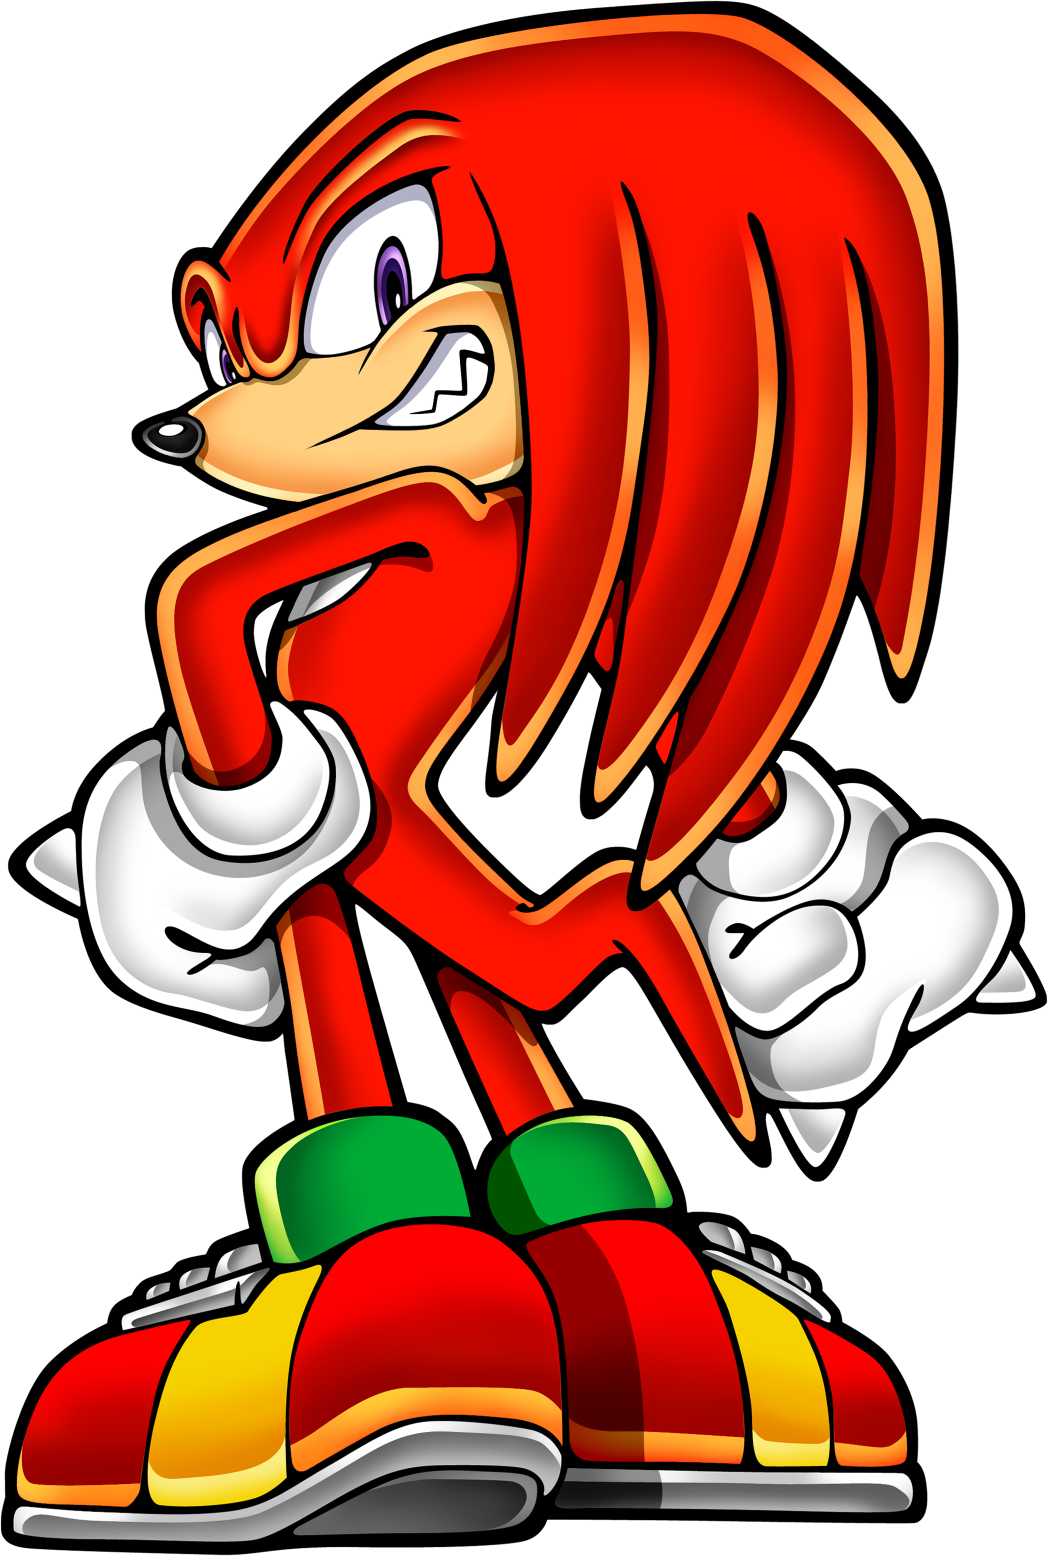 Knuckles Image - Sonic Advance 2 Knuckles, Find more high quality free tran...